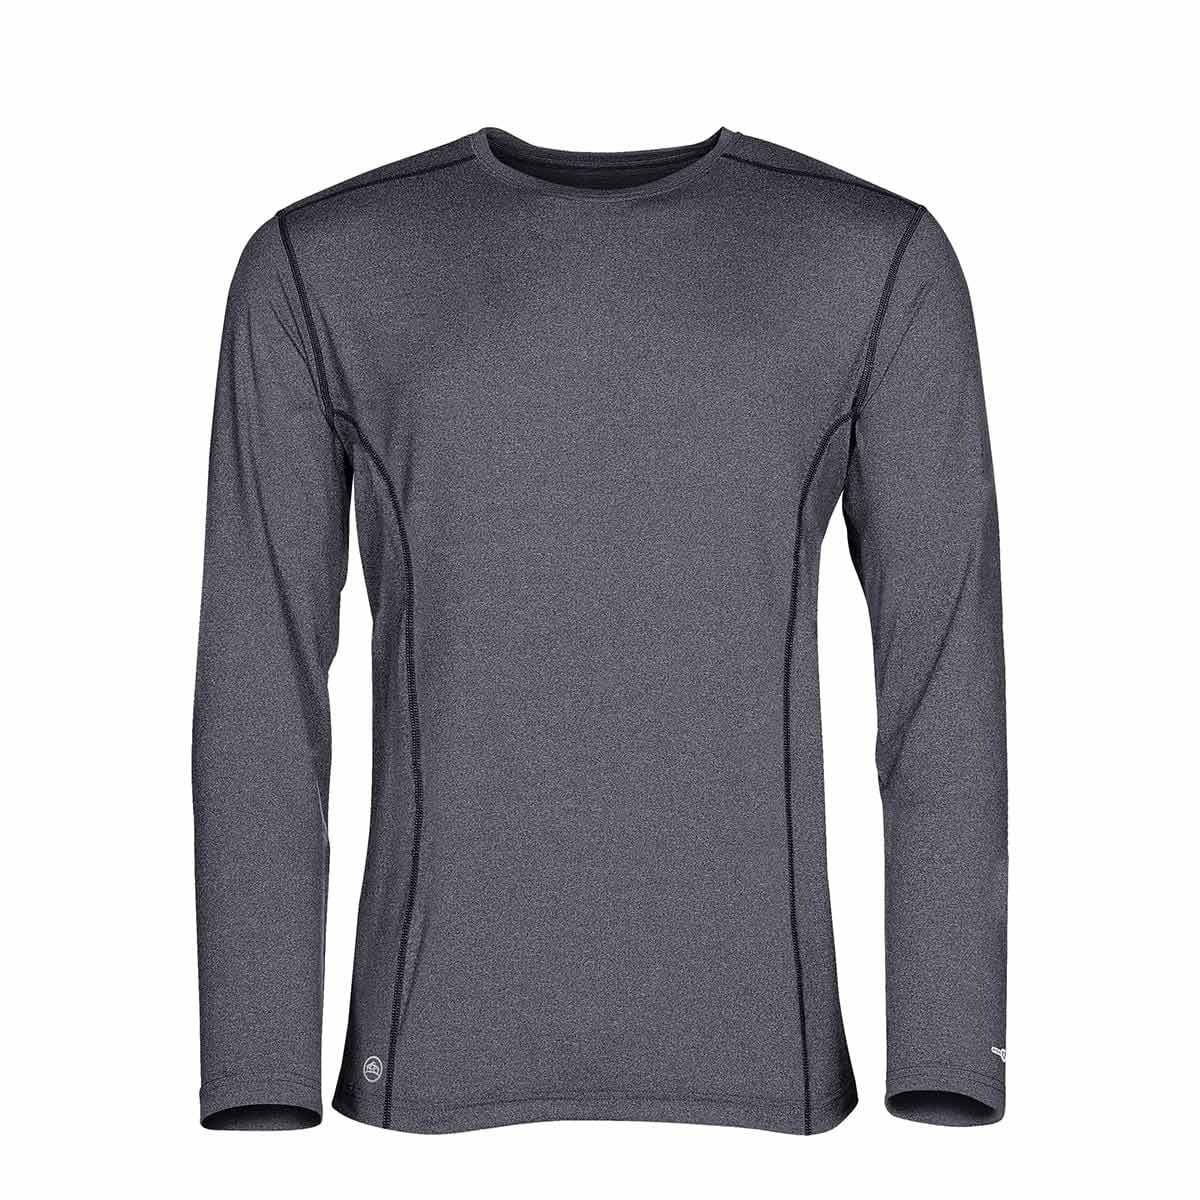 Super Soft Brushed Long Sleeve Thermal Top